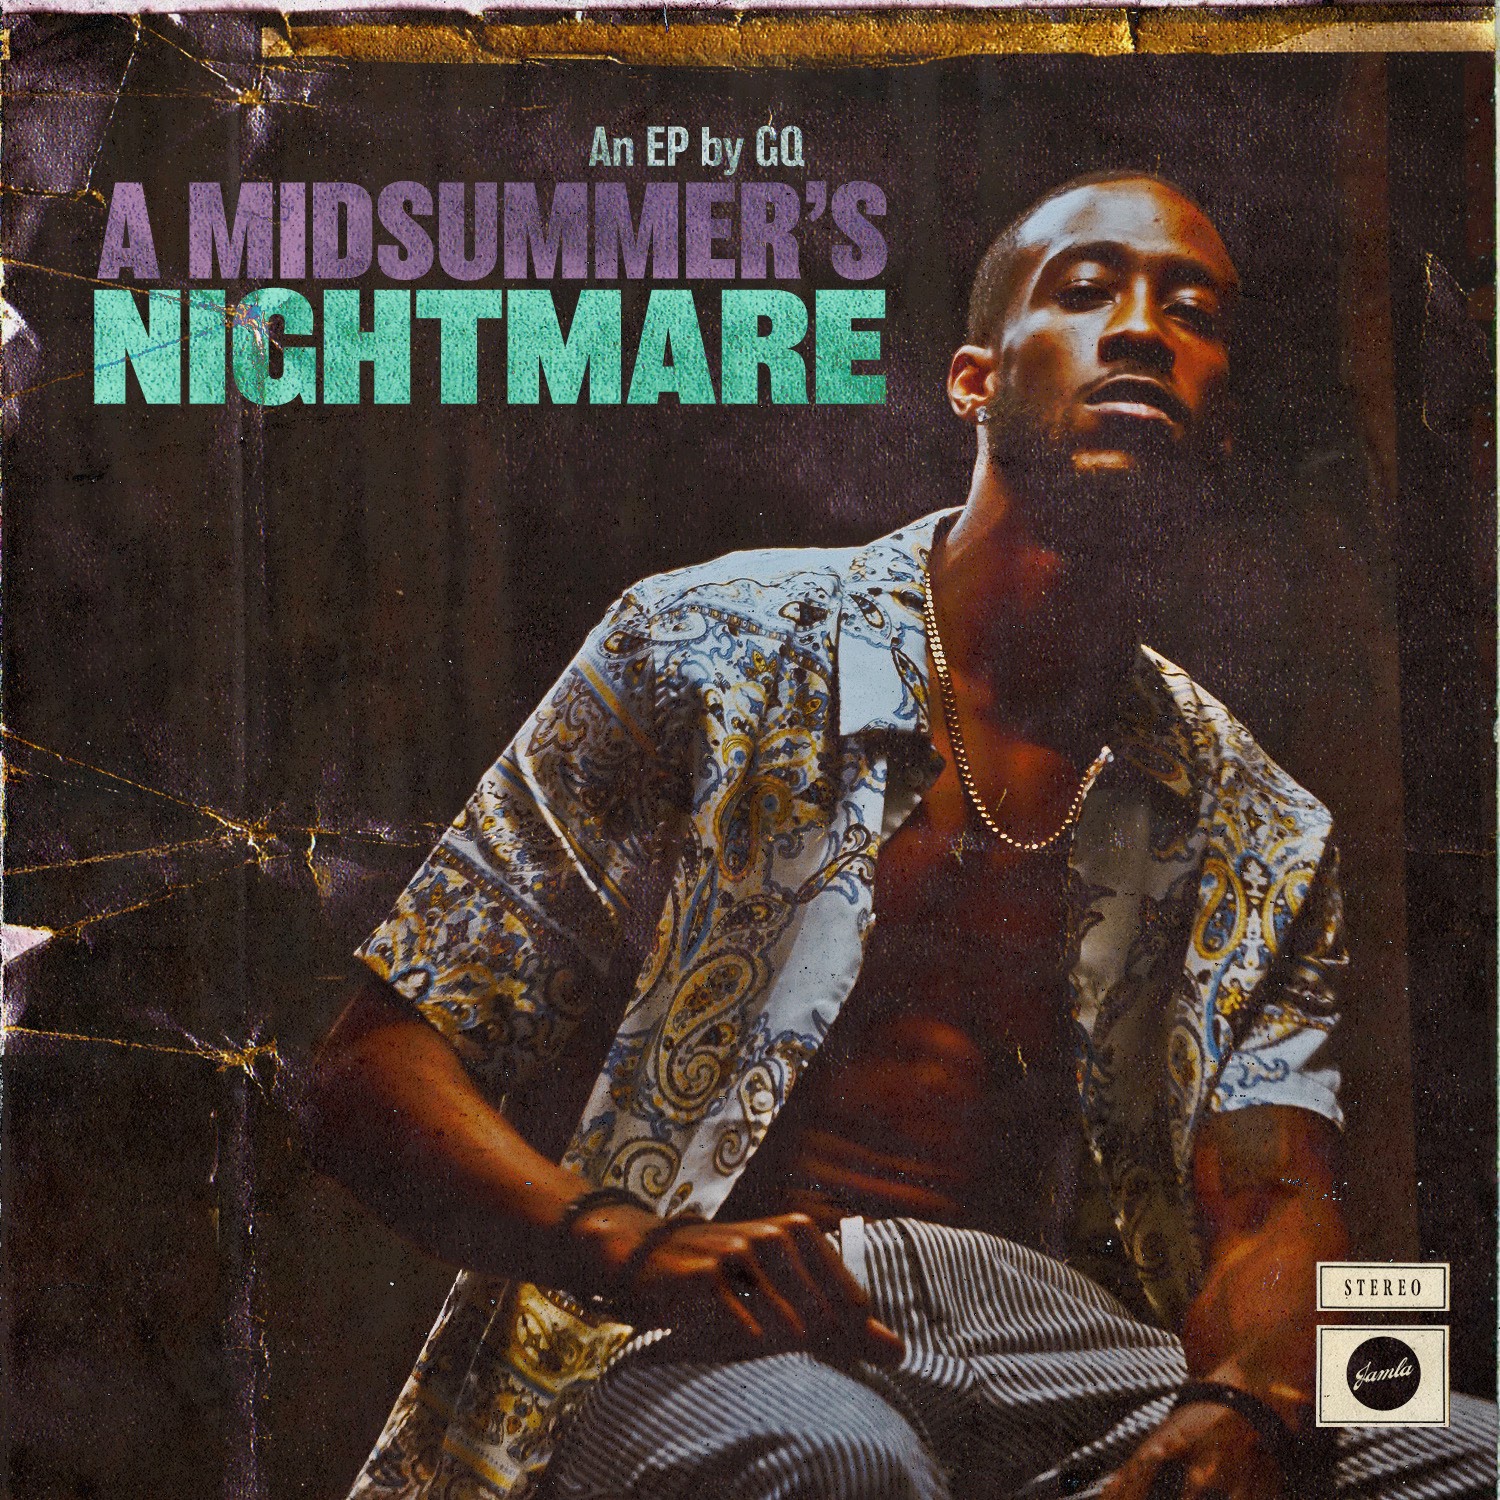 GQ Releases ‘A Midsummer’s Nightmare’ Produced by 9th Wonder